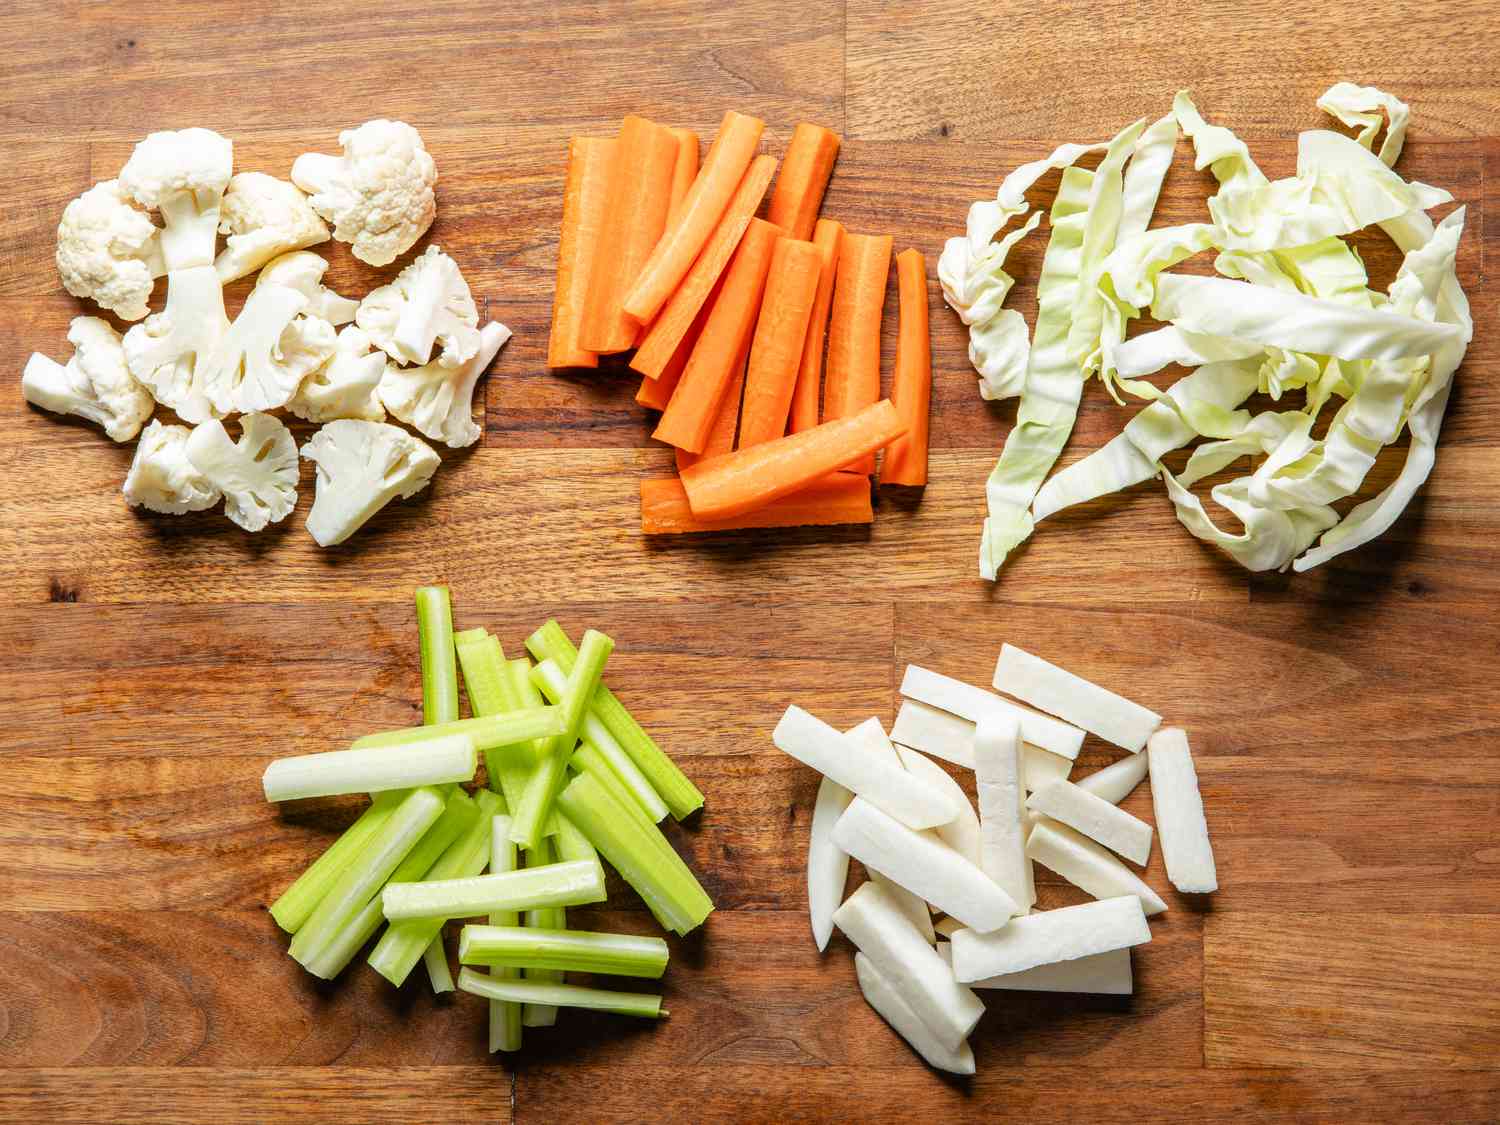 Overhead view of cut vegetables on a cutting board